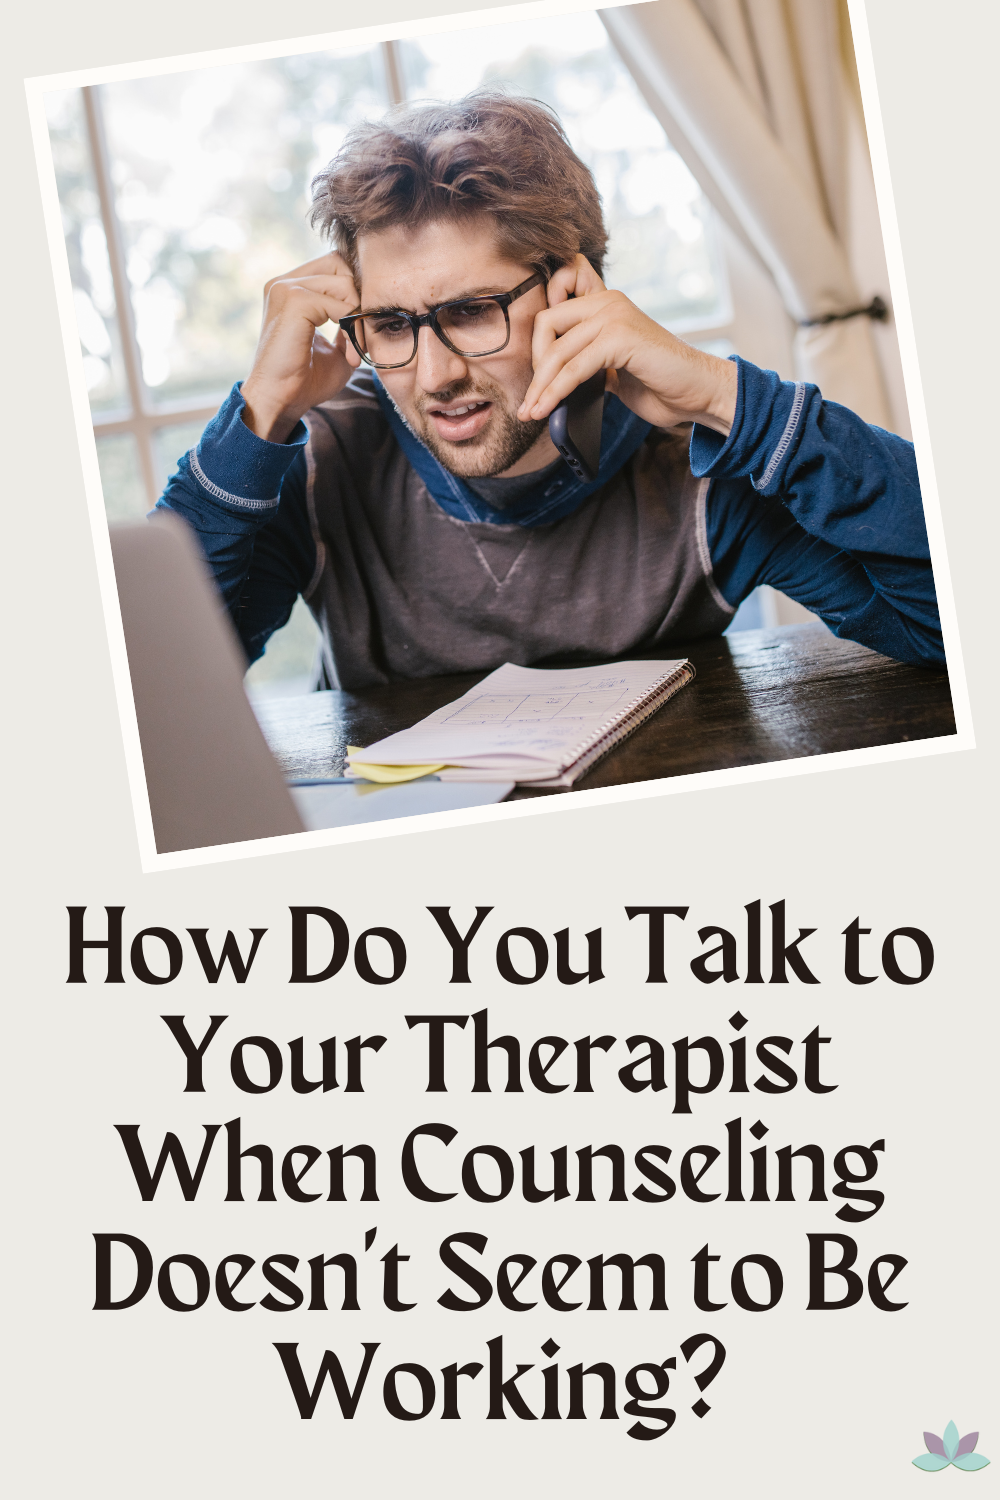 How Do You Talk to Your Therapist When Counseling Doesn't Seem to Be Working?